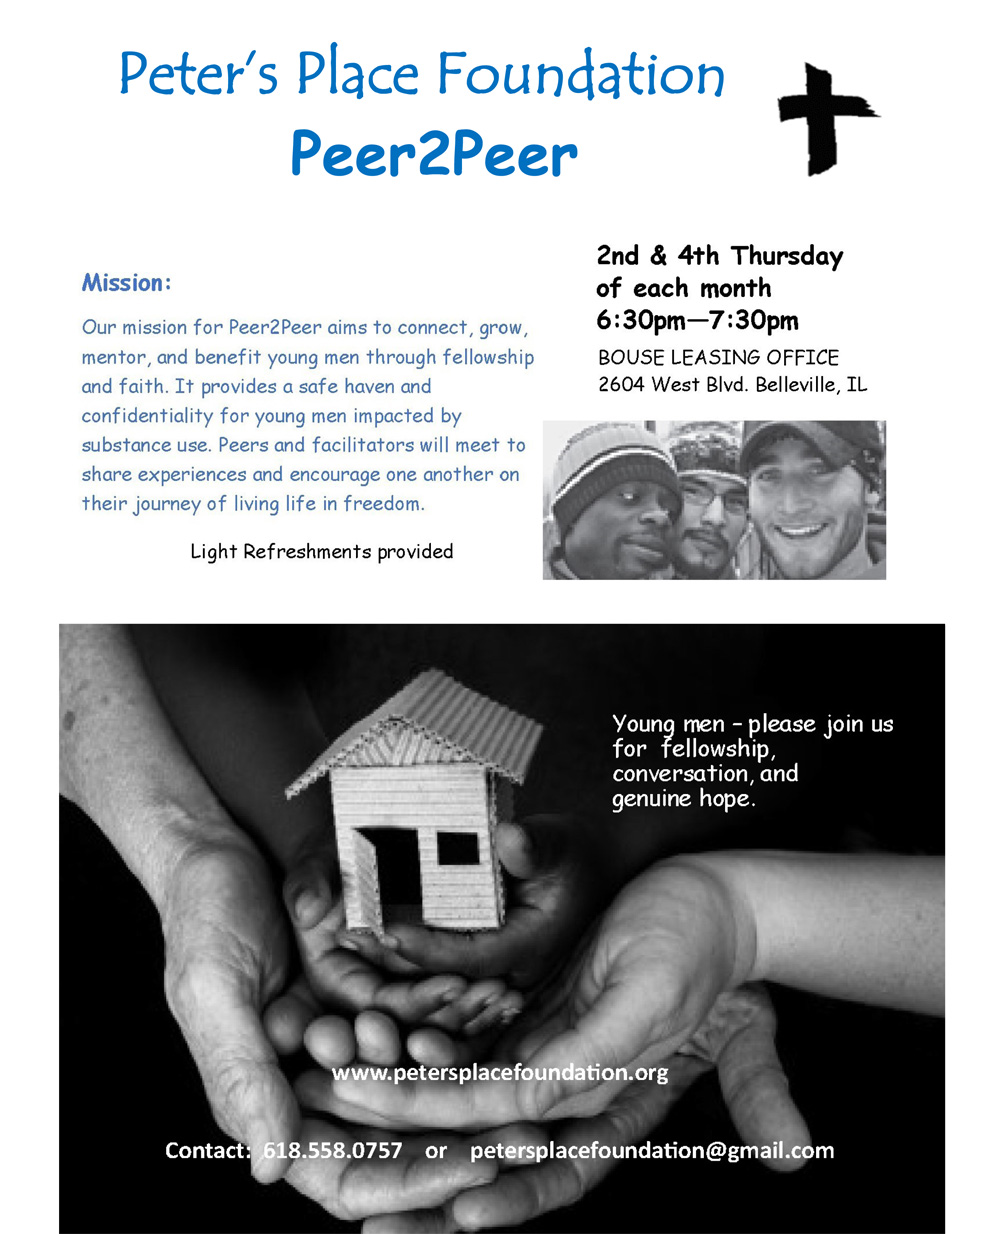 Peer2Peer Ministry at Peter's Place Foundation